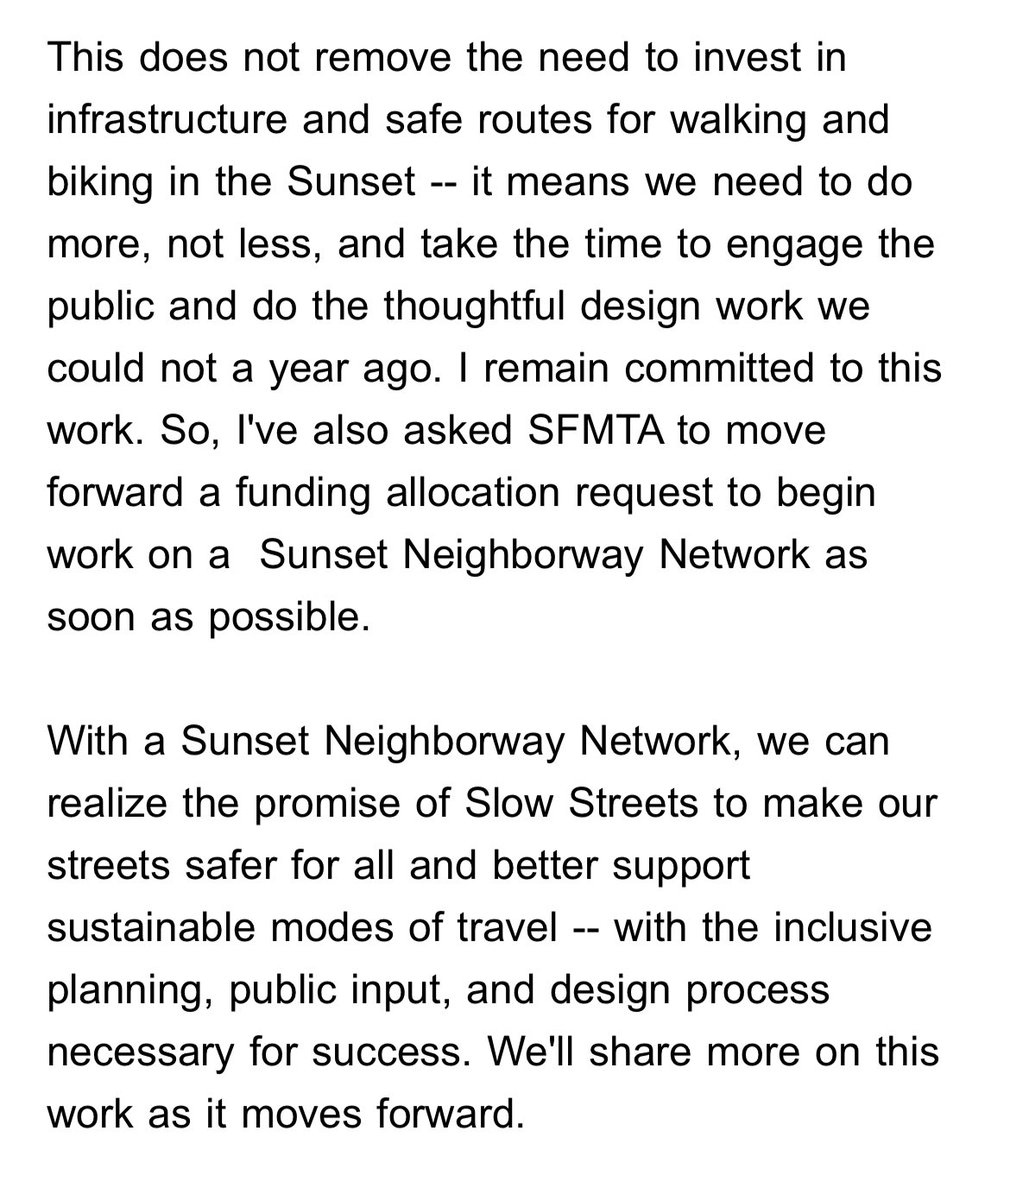 the email mentions a “neighborway network” – do want to note that neighborways, per the SFMTA definition, are not the same as closing to thru traffic like slow streets - they involve a set of potential traffic calming measures. https://www.sfmta.com/blog/neighborways-new-type-project-create-calmer-more-livable-streets